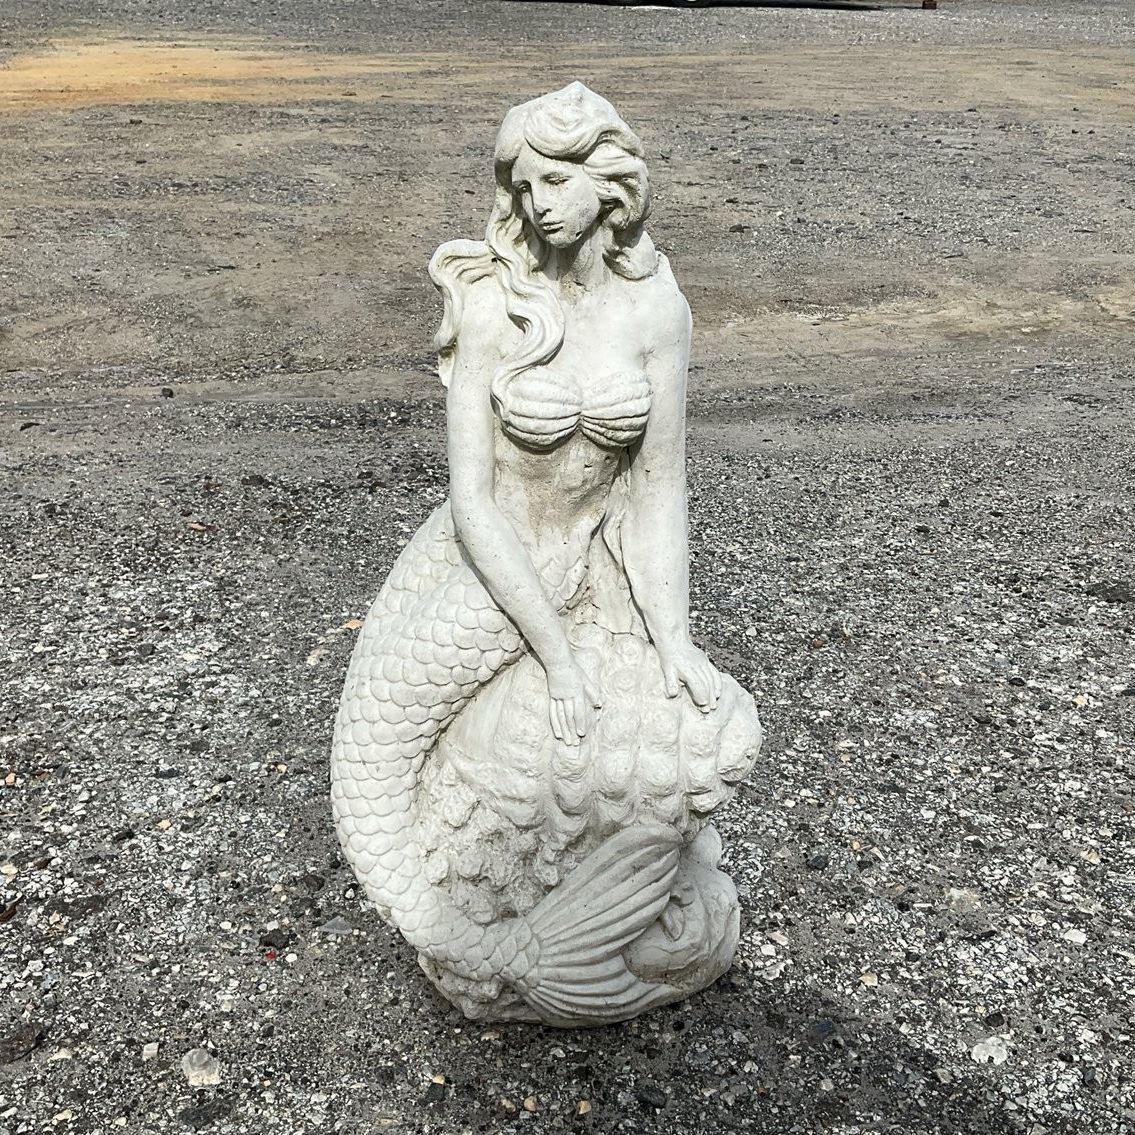 Lot 1 in our current Patio Sale features this beautiful cast stone garden statue of a mermaid. Head over to BriggsAuction.com or our mobile app now to bid! #FinditatBriggs #GardenDecor #PatioSZN